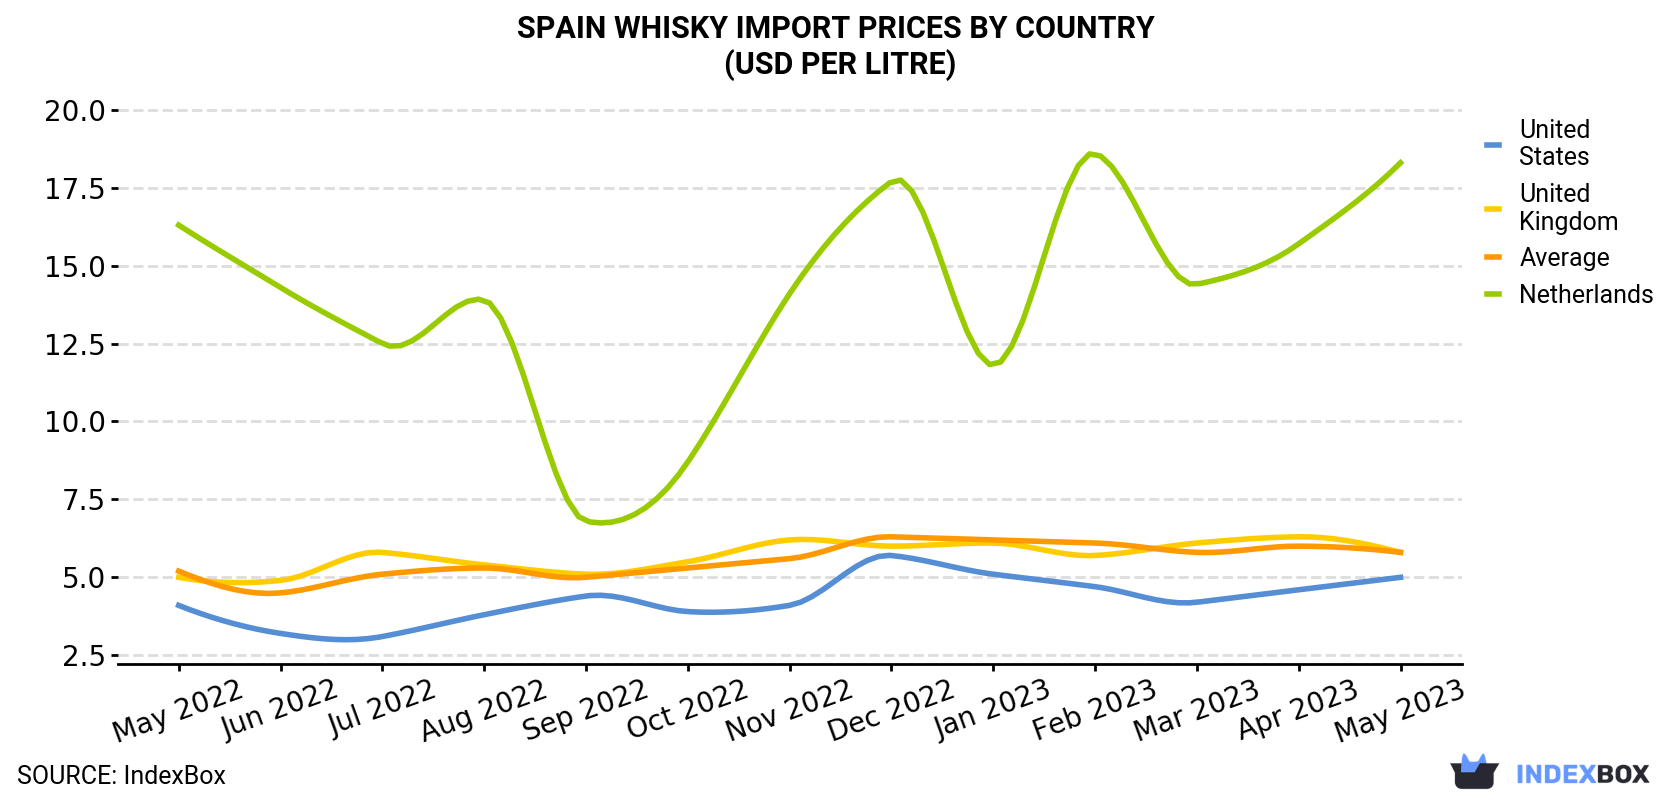 Spain Whisky Import Prices By Country (USD Per Litre)